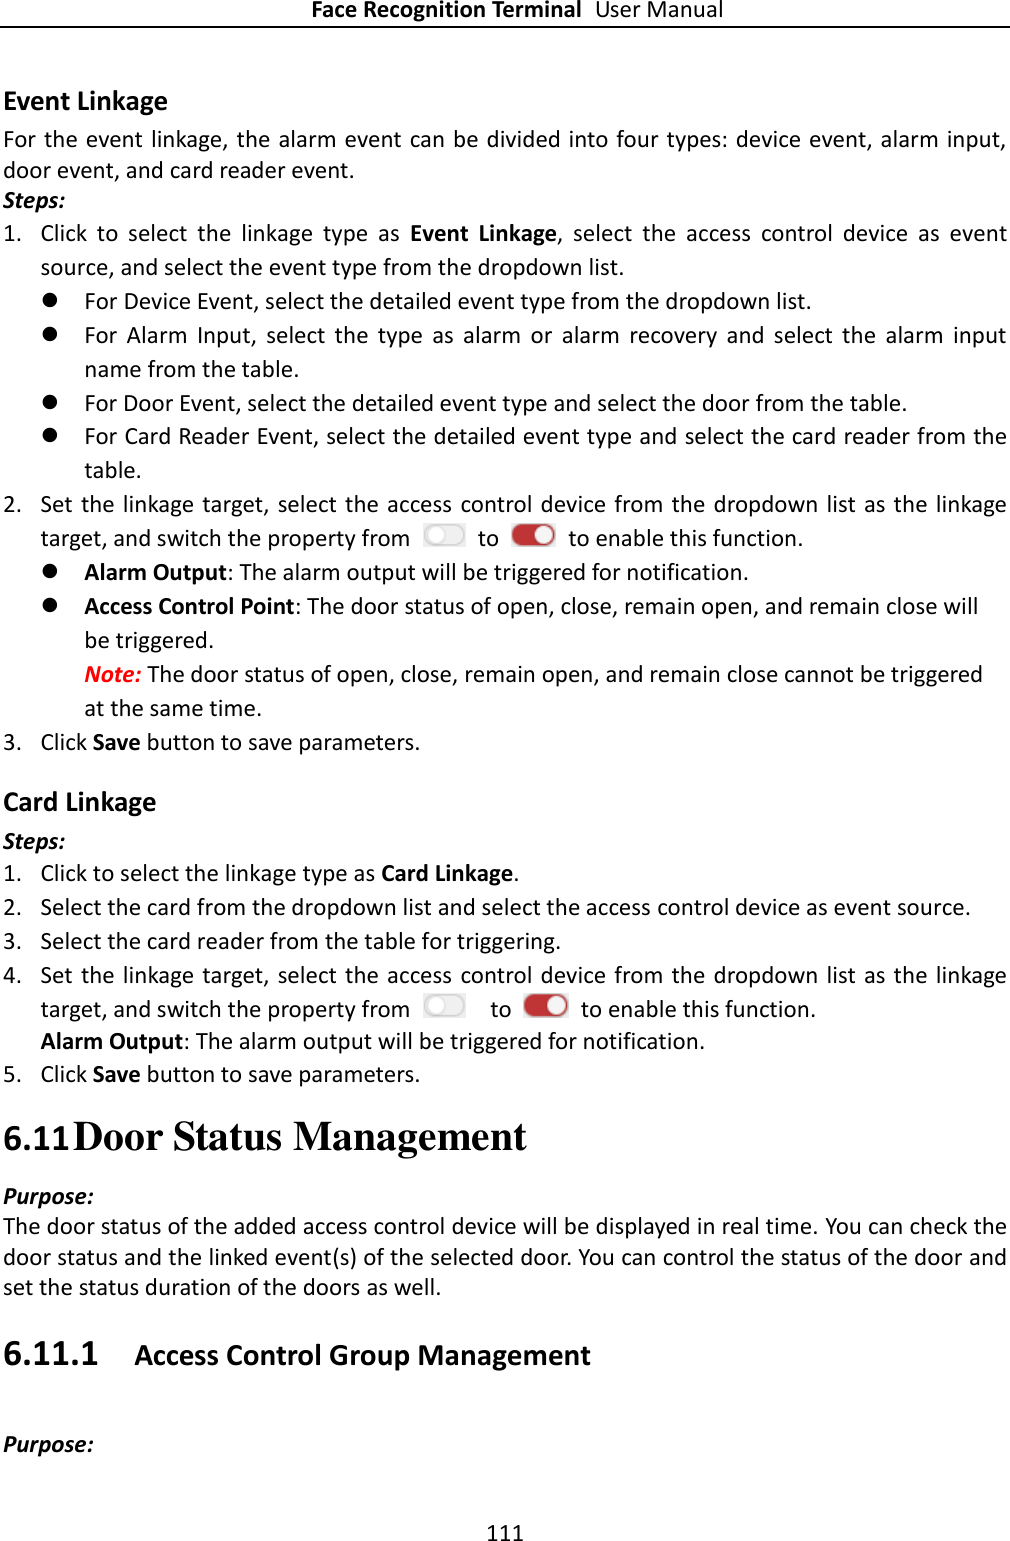 Face Recognition Terminal User Manual 111  Event Linkage For the event linkage, the alarm event can be divided into four types: device event, alarm input, door event, and card reader event.   Steps: 1. Click  to  select  the  linkage  type  as  Event  Linkage,  select  the  access  control  device  as  event source, and select the event type from the dropdown list.  For Device Event, select the detailed event type from the dropdown list.  For  Alarm  Input,  select  the  type  as  alarm  or  alarm  recovery  and  select  the  alarm  input name from the table.  For Door Event, select the detailed event type and select the door from the table.  For Card Reader Event, select the detailed event type and select the card reader from the table. 2. Set the linkage target, select the access control device from the dropdown list as the linkage target, and switch the property from    to    to enable this function.  Alarm Output: The alarm output will be triggered for notification.  Access Control Point: The door status of open, close, remain open, and remain close will be triggered. Note: The door status of open, close, remain open, and remain close cannot be triggered at the same time.   3. Click Save button to save parameters.     Card Linkage Steps: 1. Click to select the linkage type as Card Linkage. 2. Select the card from the dropdown list and select the access control device as event source.   3. Select the card reader from the table for triggering.   4. Set the linkage target, select the access control device from the dropdown list as the linkage target, and switch the property from    to    to enable this function. Alarm Output: The alarm output will be triggered for notification. 5. Click Save button to save parameters.   6.11 Door Status Management   Purpose: The door status of the added access control device will be displayed in real time. You can check the door status and the linked event(s) of the selected door. You can control the status of the door and set the status duration of the doors as well. 6.11.1 Access Control Group Management Purpose: 